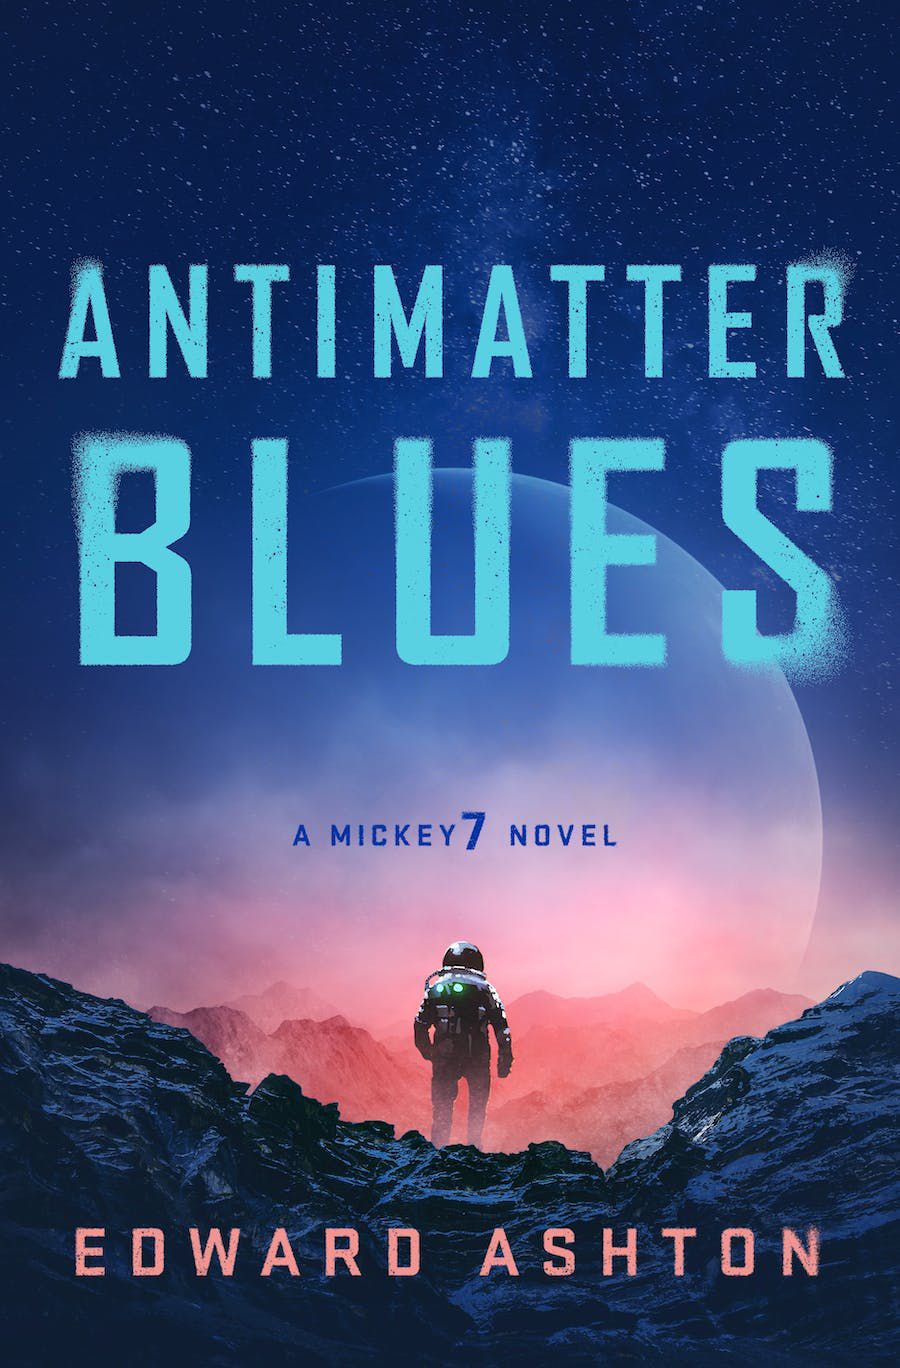 Cover image for Edward Ashton’s Antimatter Blues, A Mickey7 Novel. It features an astronaut from behind on a rocky planet, looking out at another planet in the distance.